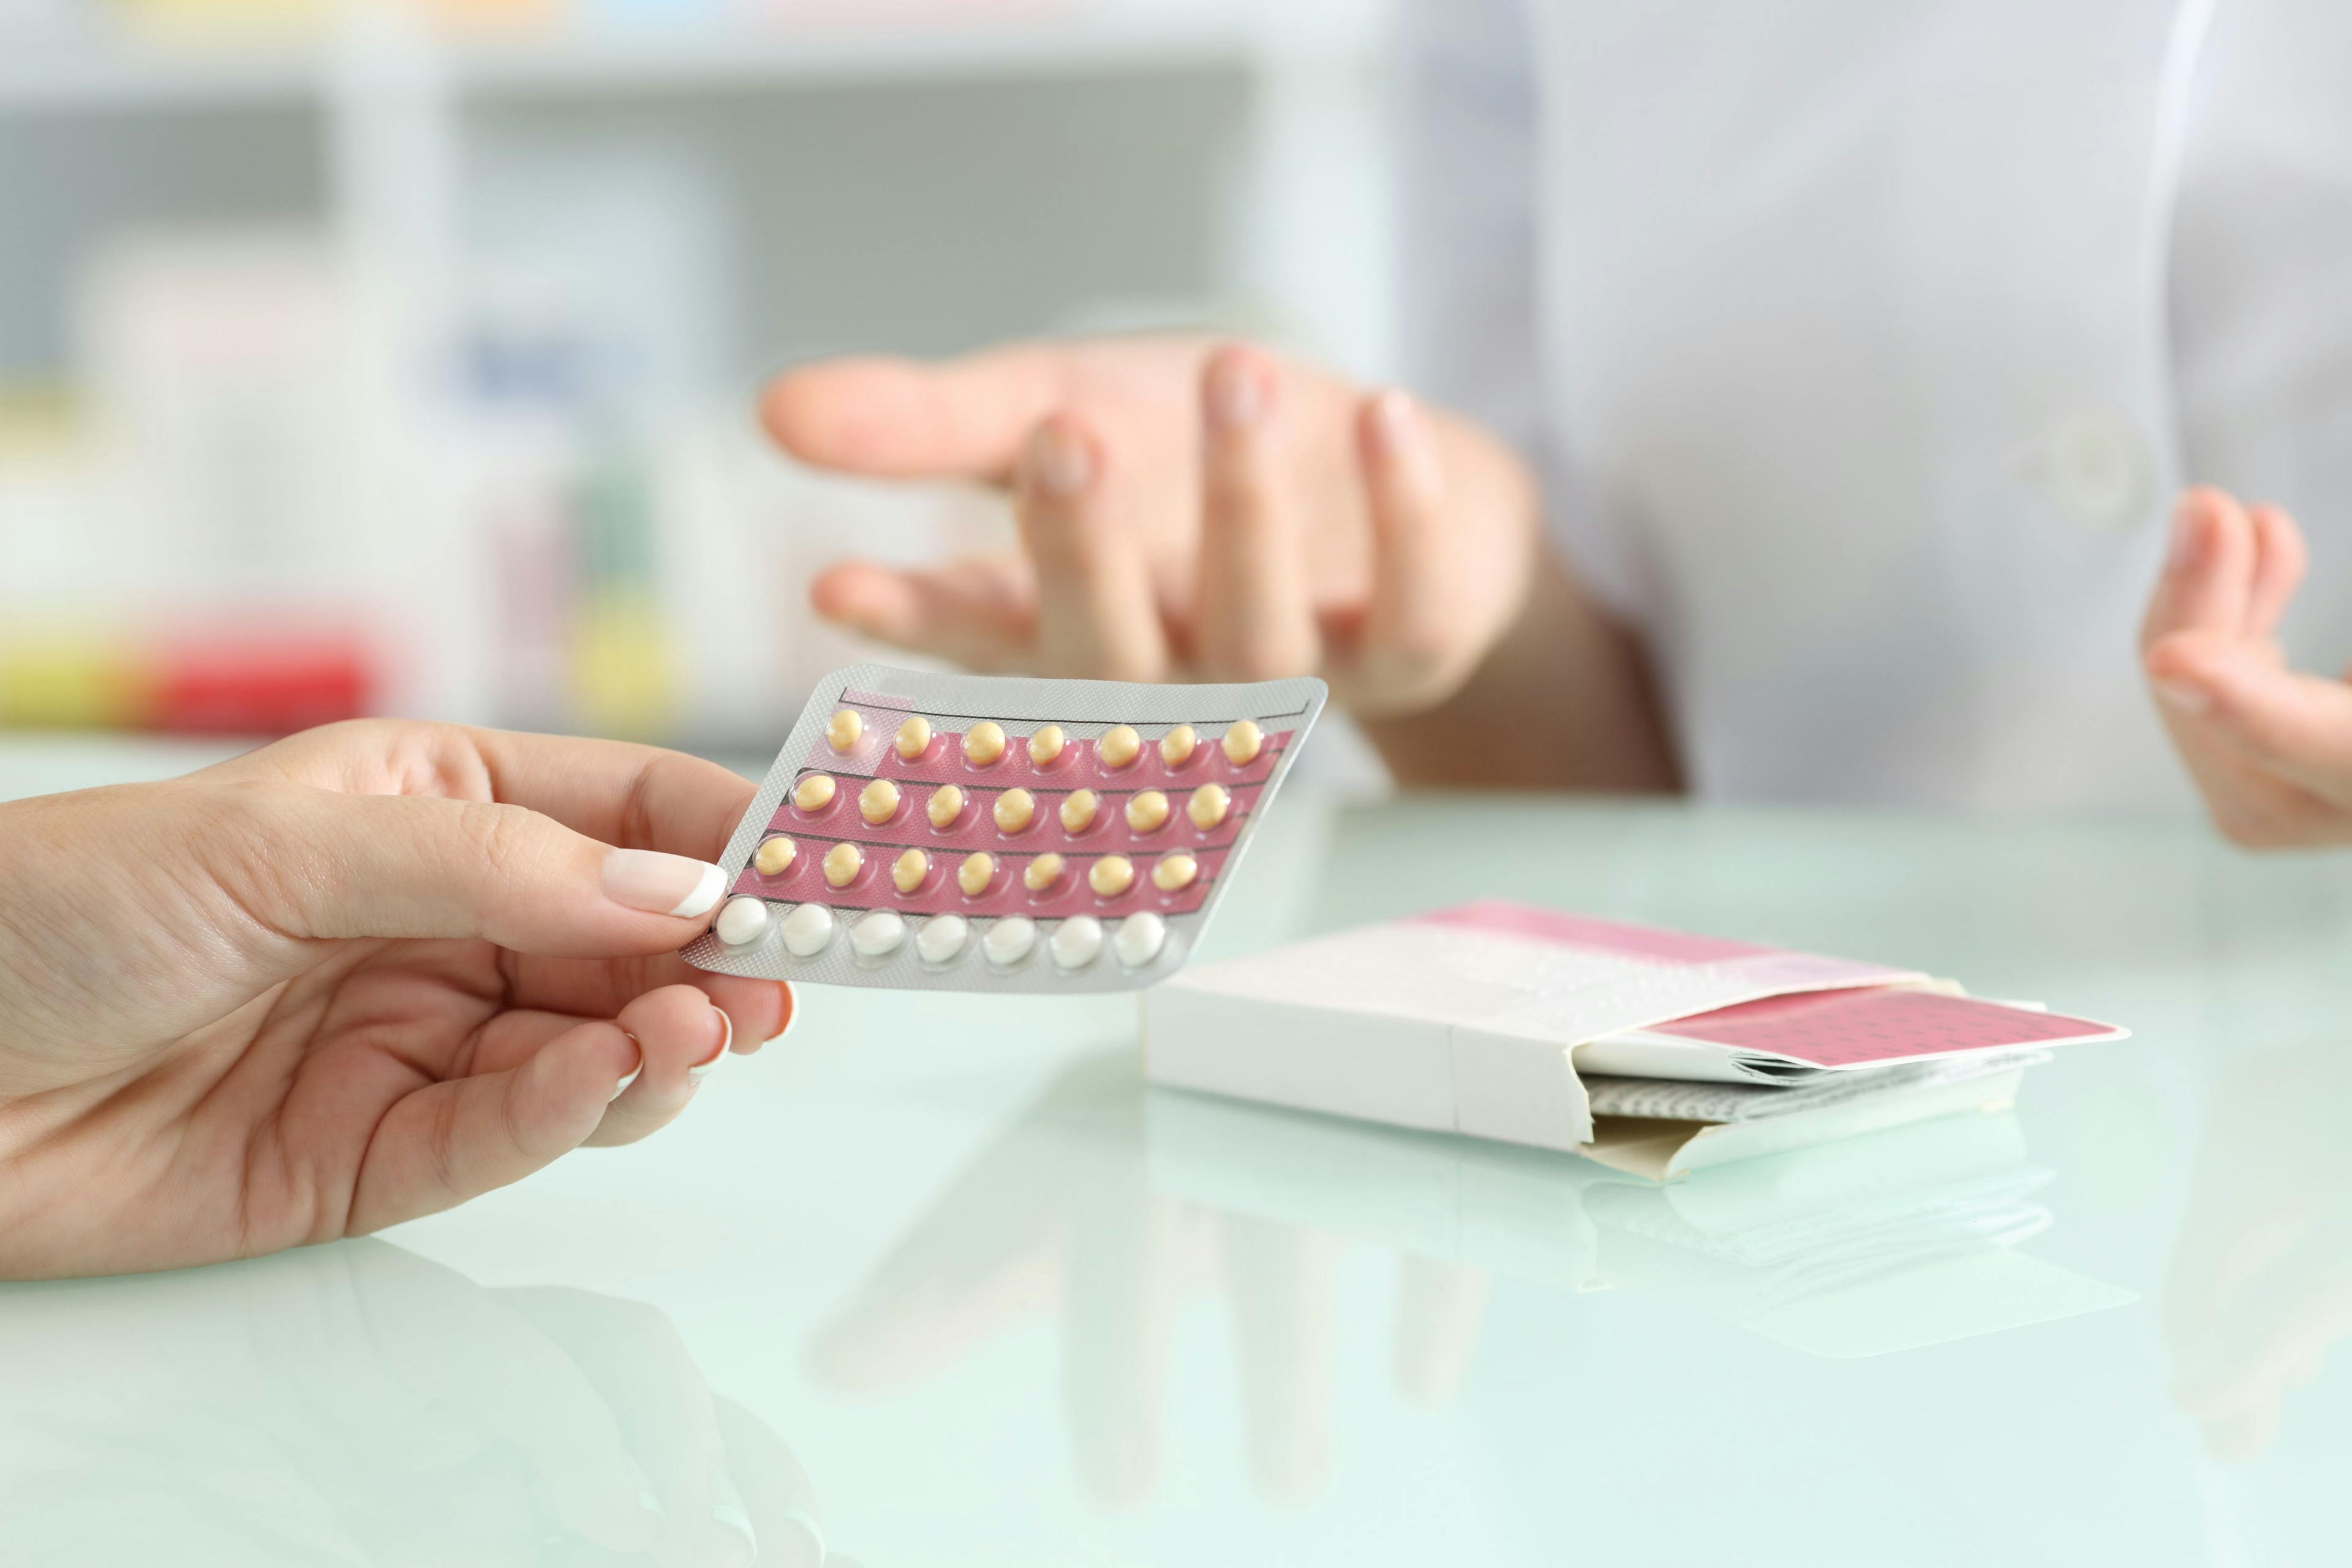 Study Shows Progestogen-Only Contraceptives May Increase Breast Cancer Risk